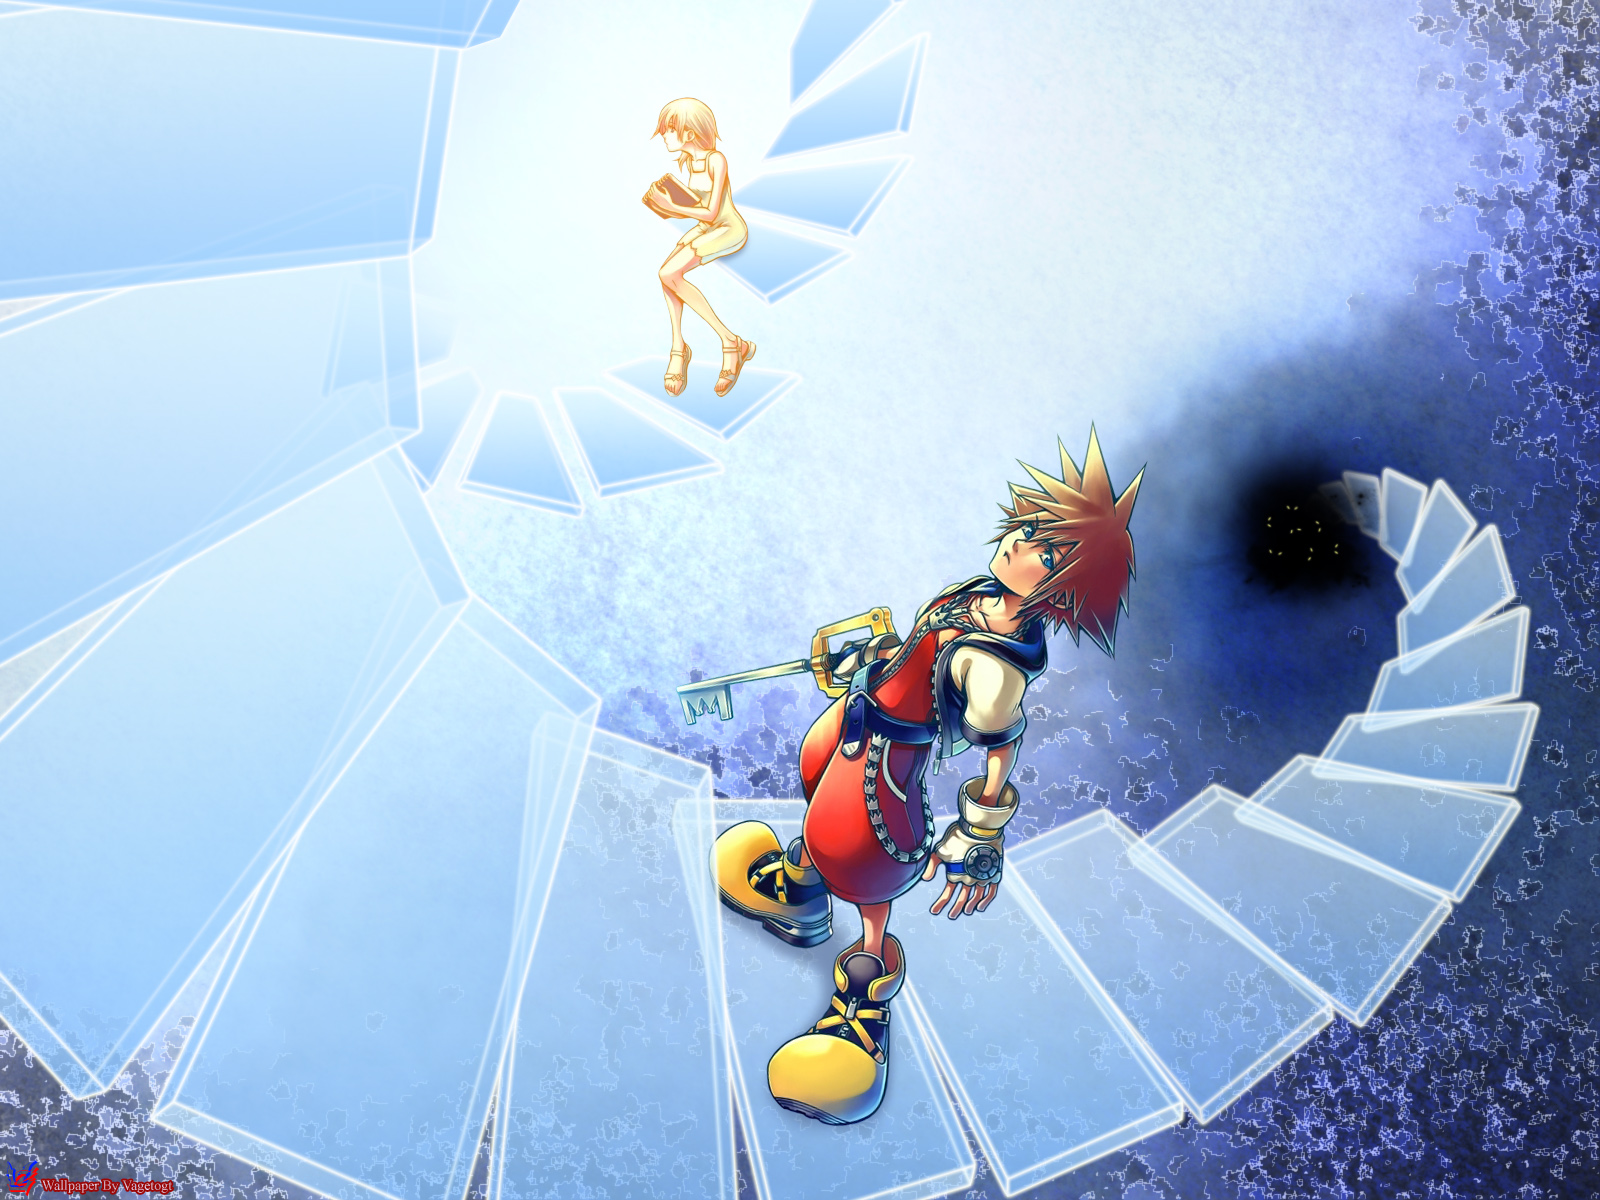 Kingdom Hearts characters Naminé and Sora on a high-definition desktop wallpaper.